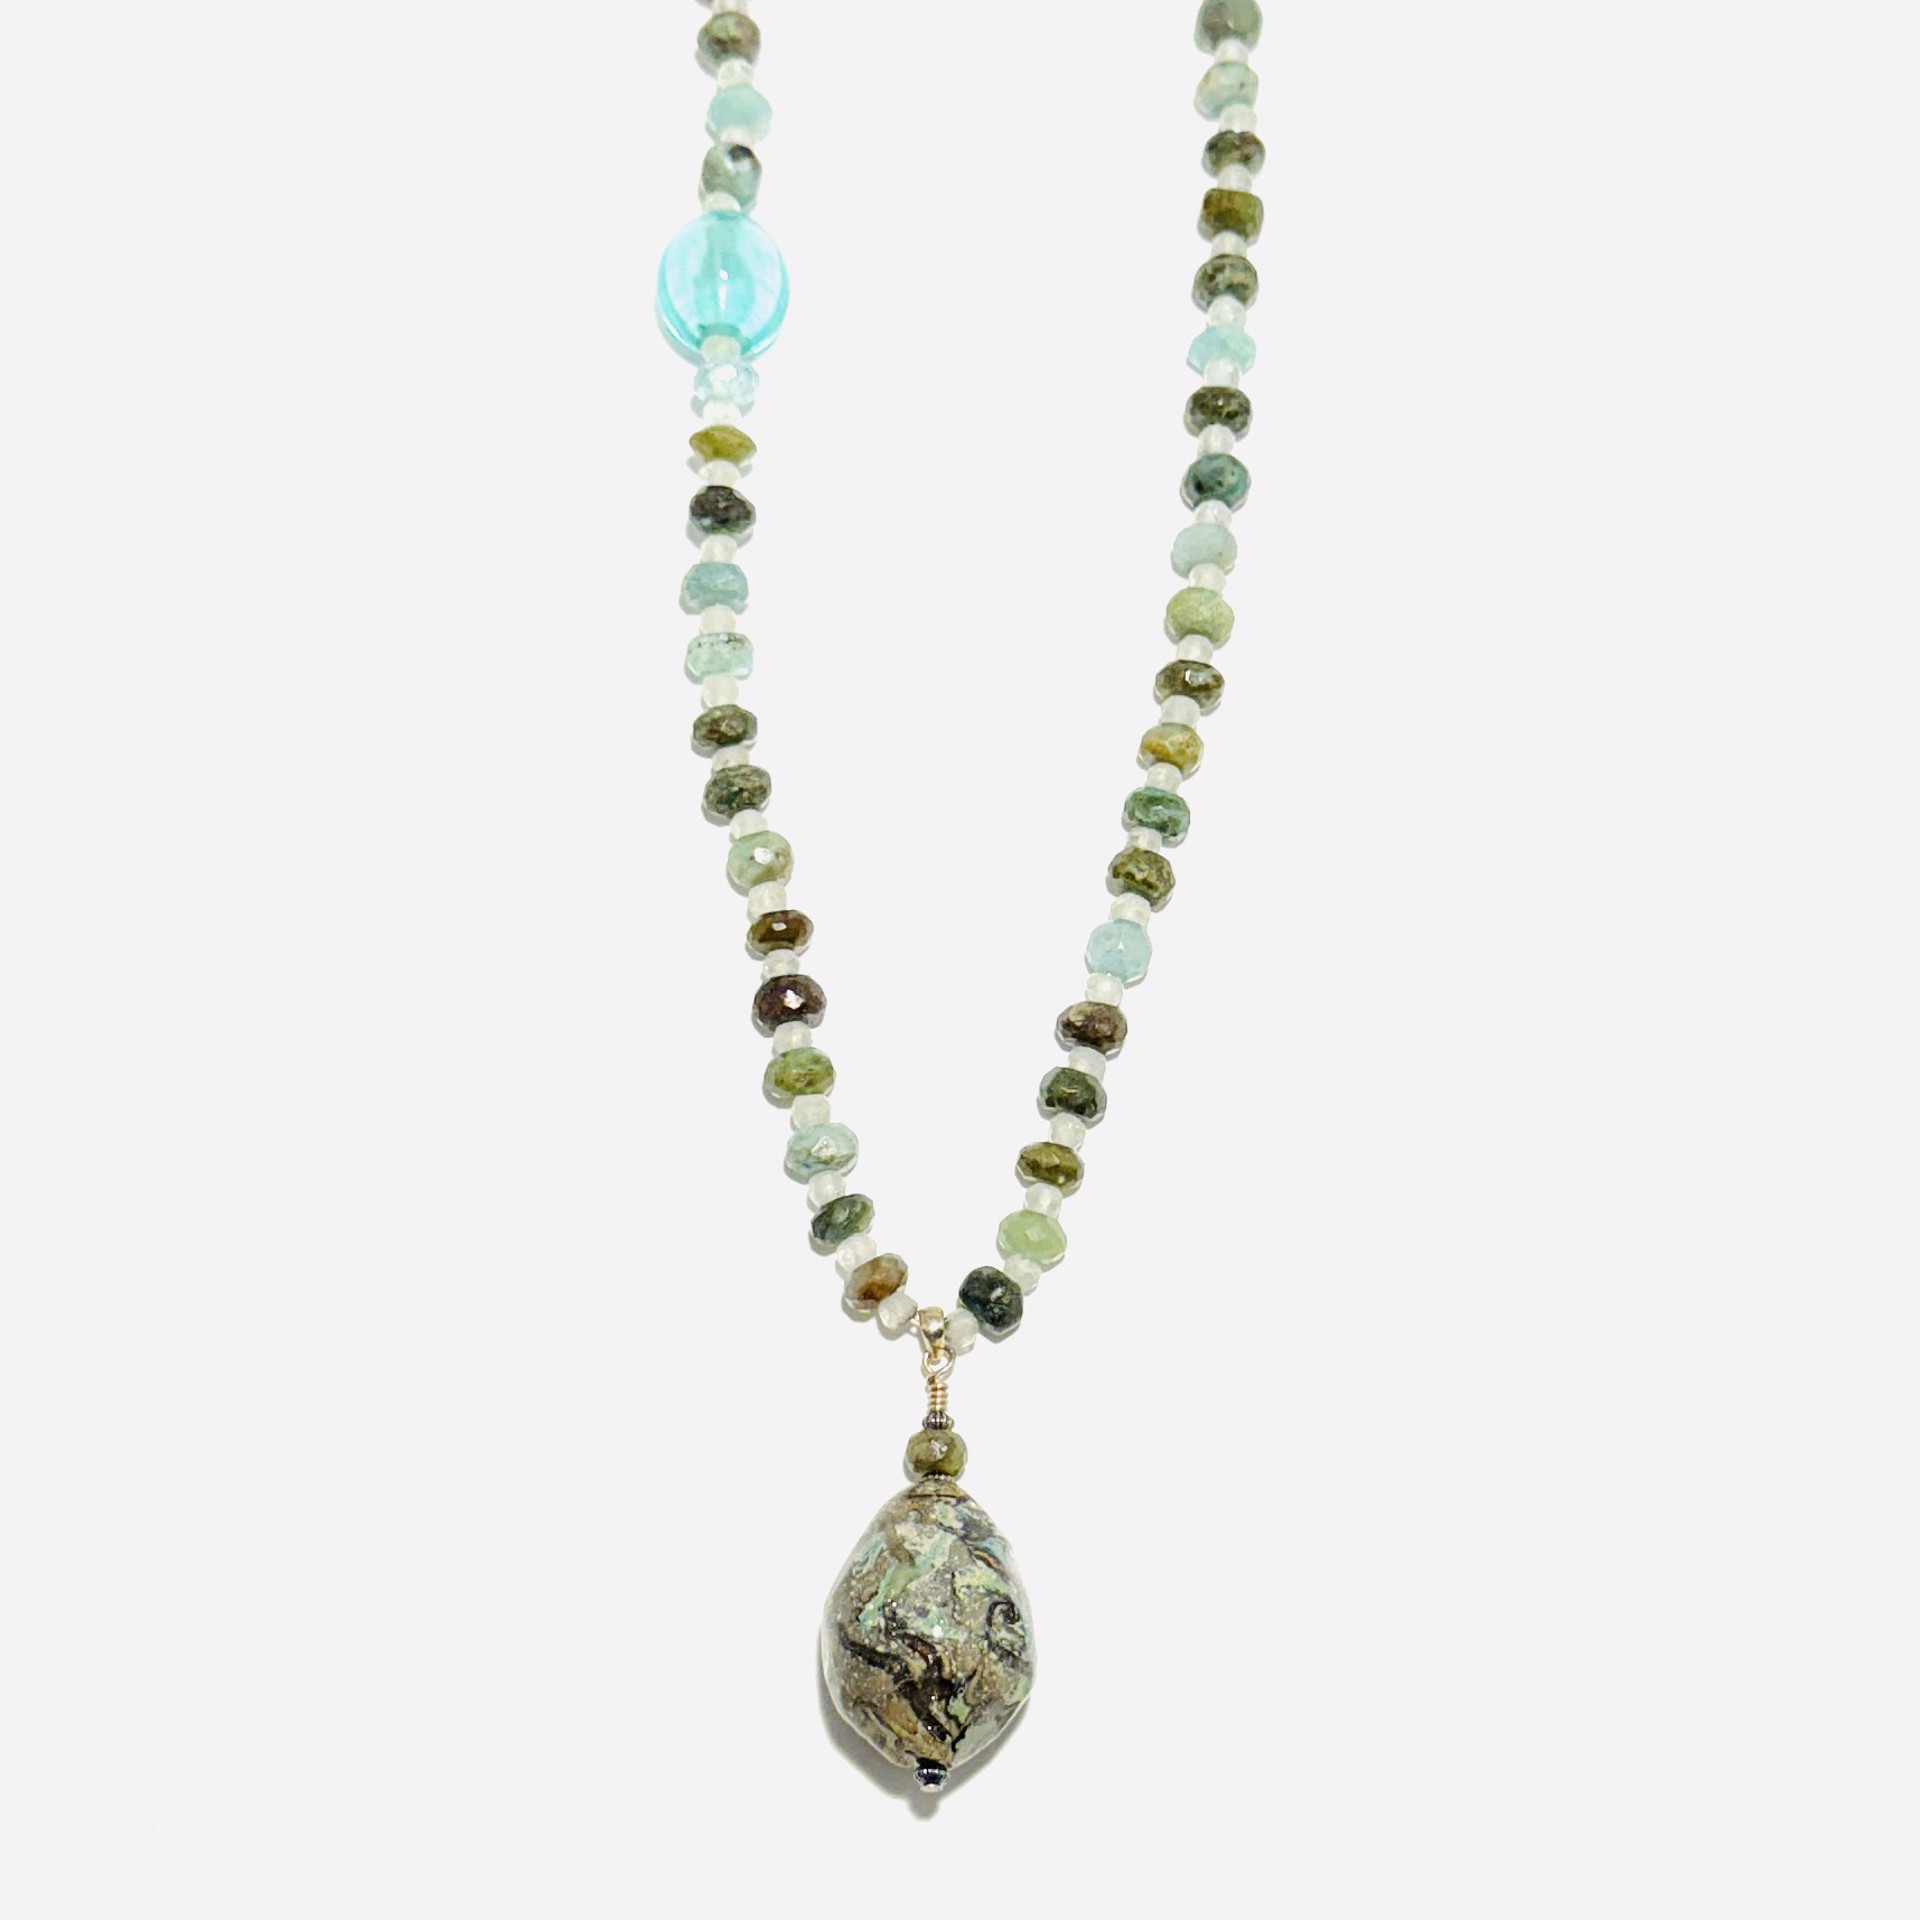 Silver Ivory Shards Pendant, Peruvian Opal and One Bubble Bead Bead Necklace LS23-49 by Linda Sacra